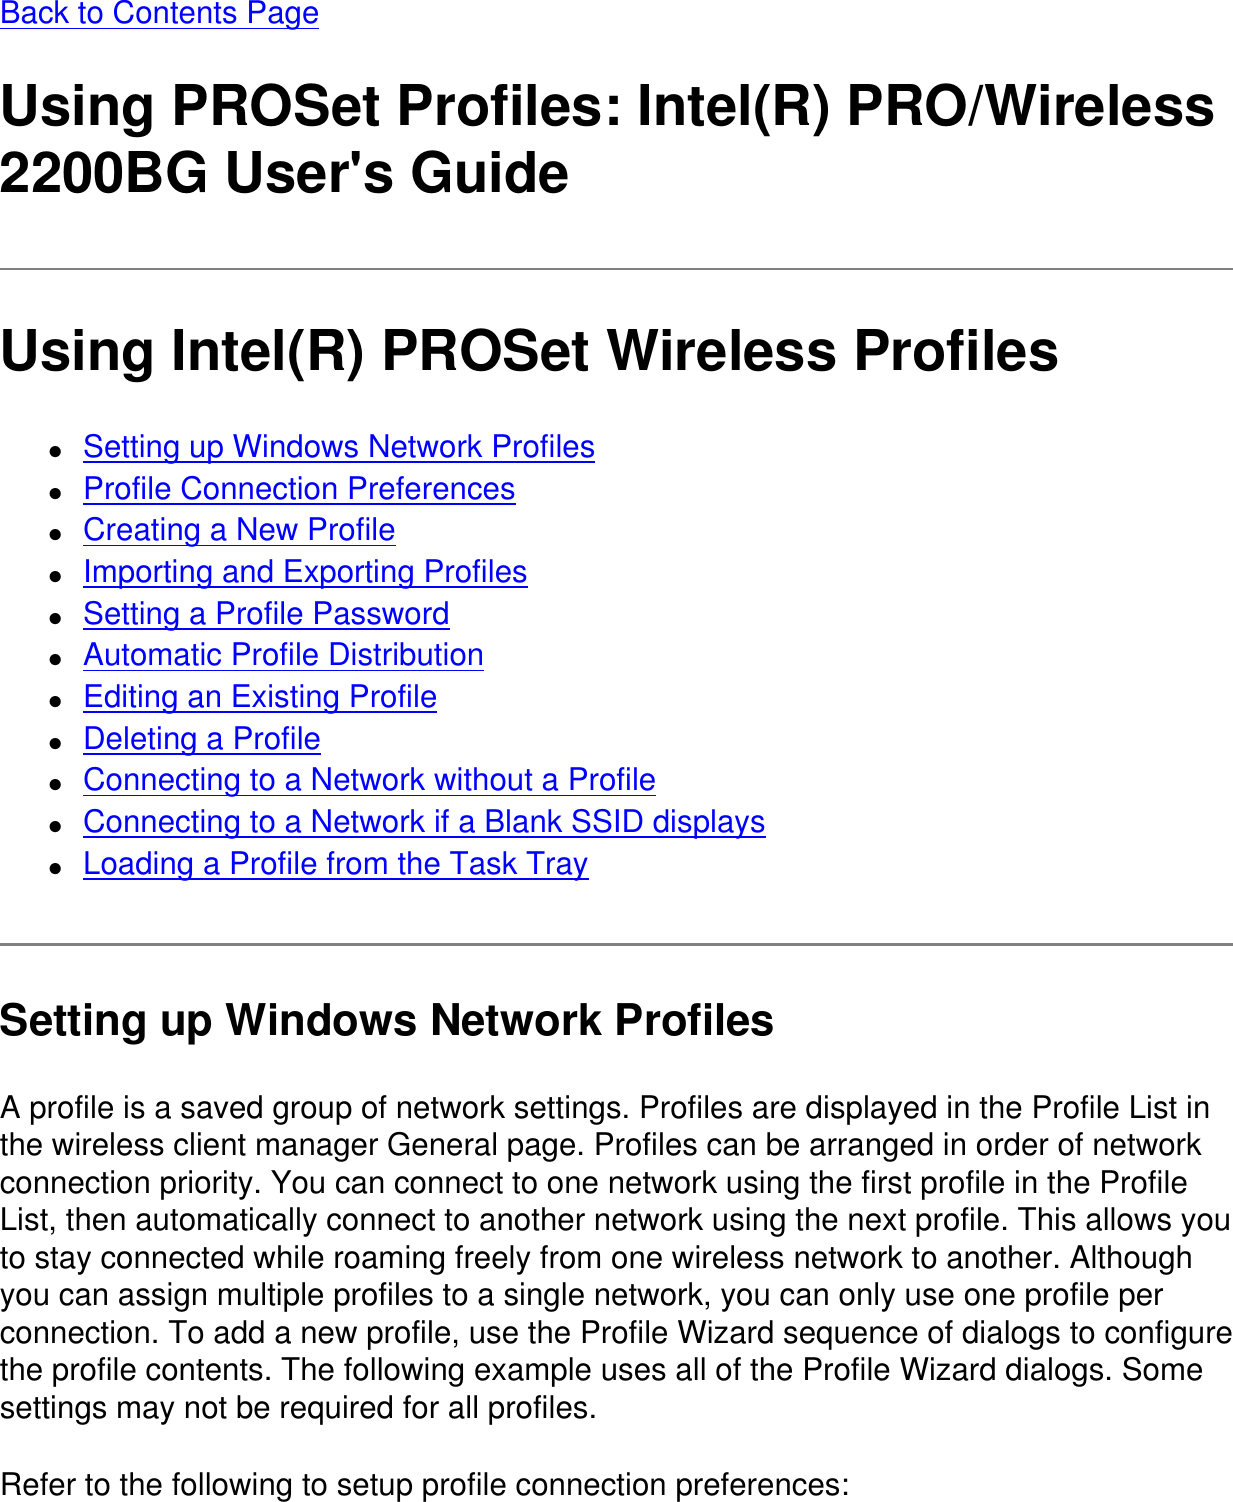 Back to Contents PageUsing PROSet Profiles: Intel(R) PRO/Wireless 2200BG User&apos;s GuideUsing Intel(R) PROSet Wireless Profiles●     Setting up Windows Network Profiles●     Profile Connection Preferences●     Creating a New Profile●     Importing and Exporting Profiles●     Setting a Profile Password●     Automatic Profile Distribution●     Editing an Existing Profile●     Deleting a Profile●     Connecting to a Network without a Profile●     Connecting to a Network if a Blank SSID displays●     Loading a Profile from the Task TraySetting up Windows Network ProfilesA profile is a saved group of network settings. Profiles are displayed in the Profile List in the wireless client manager General page. Profiles can be arranged in order of network connection priority. You can connect to one network using the first profile in the Profile List, then automatically connect to another network using the next profile. This allows you to stay connected while roaming freely from one wireless network to another. Although you can assign multiple profiles to a single network, you can only use one profile per connection. To add a new profile, use the Profile Wizard sequence of dialogs to configure the profile contents. The following example uses all of the Profile Wizard dialogs. Some settings may not be required for all profiles.Refer to the following to setup profile connection preferences: